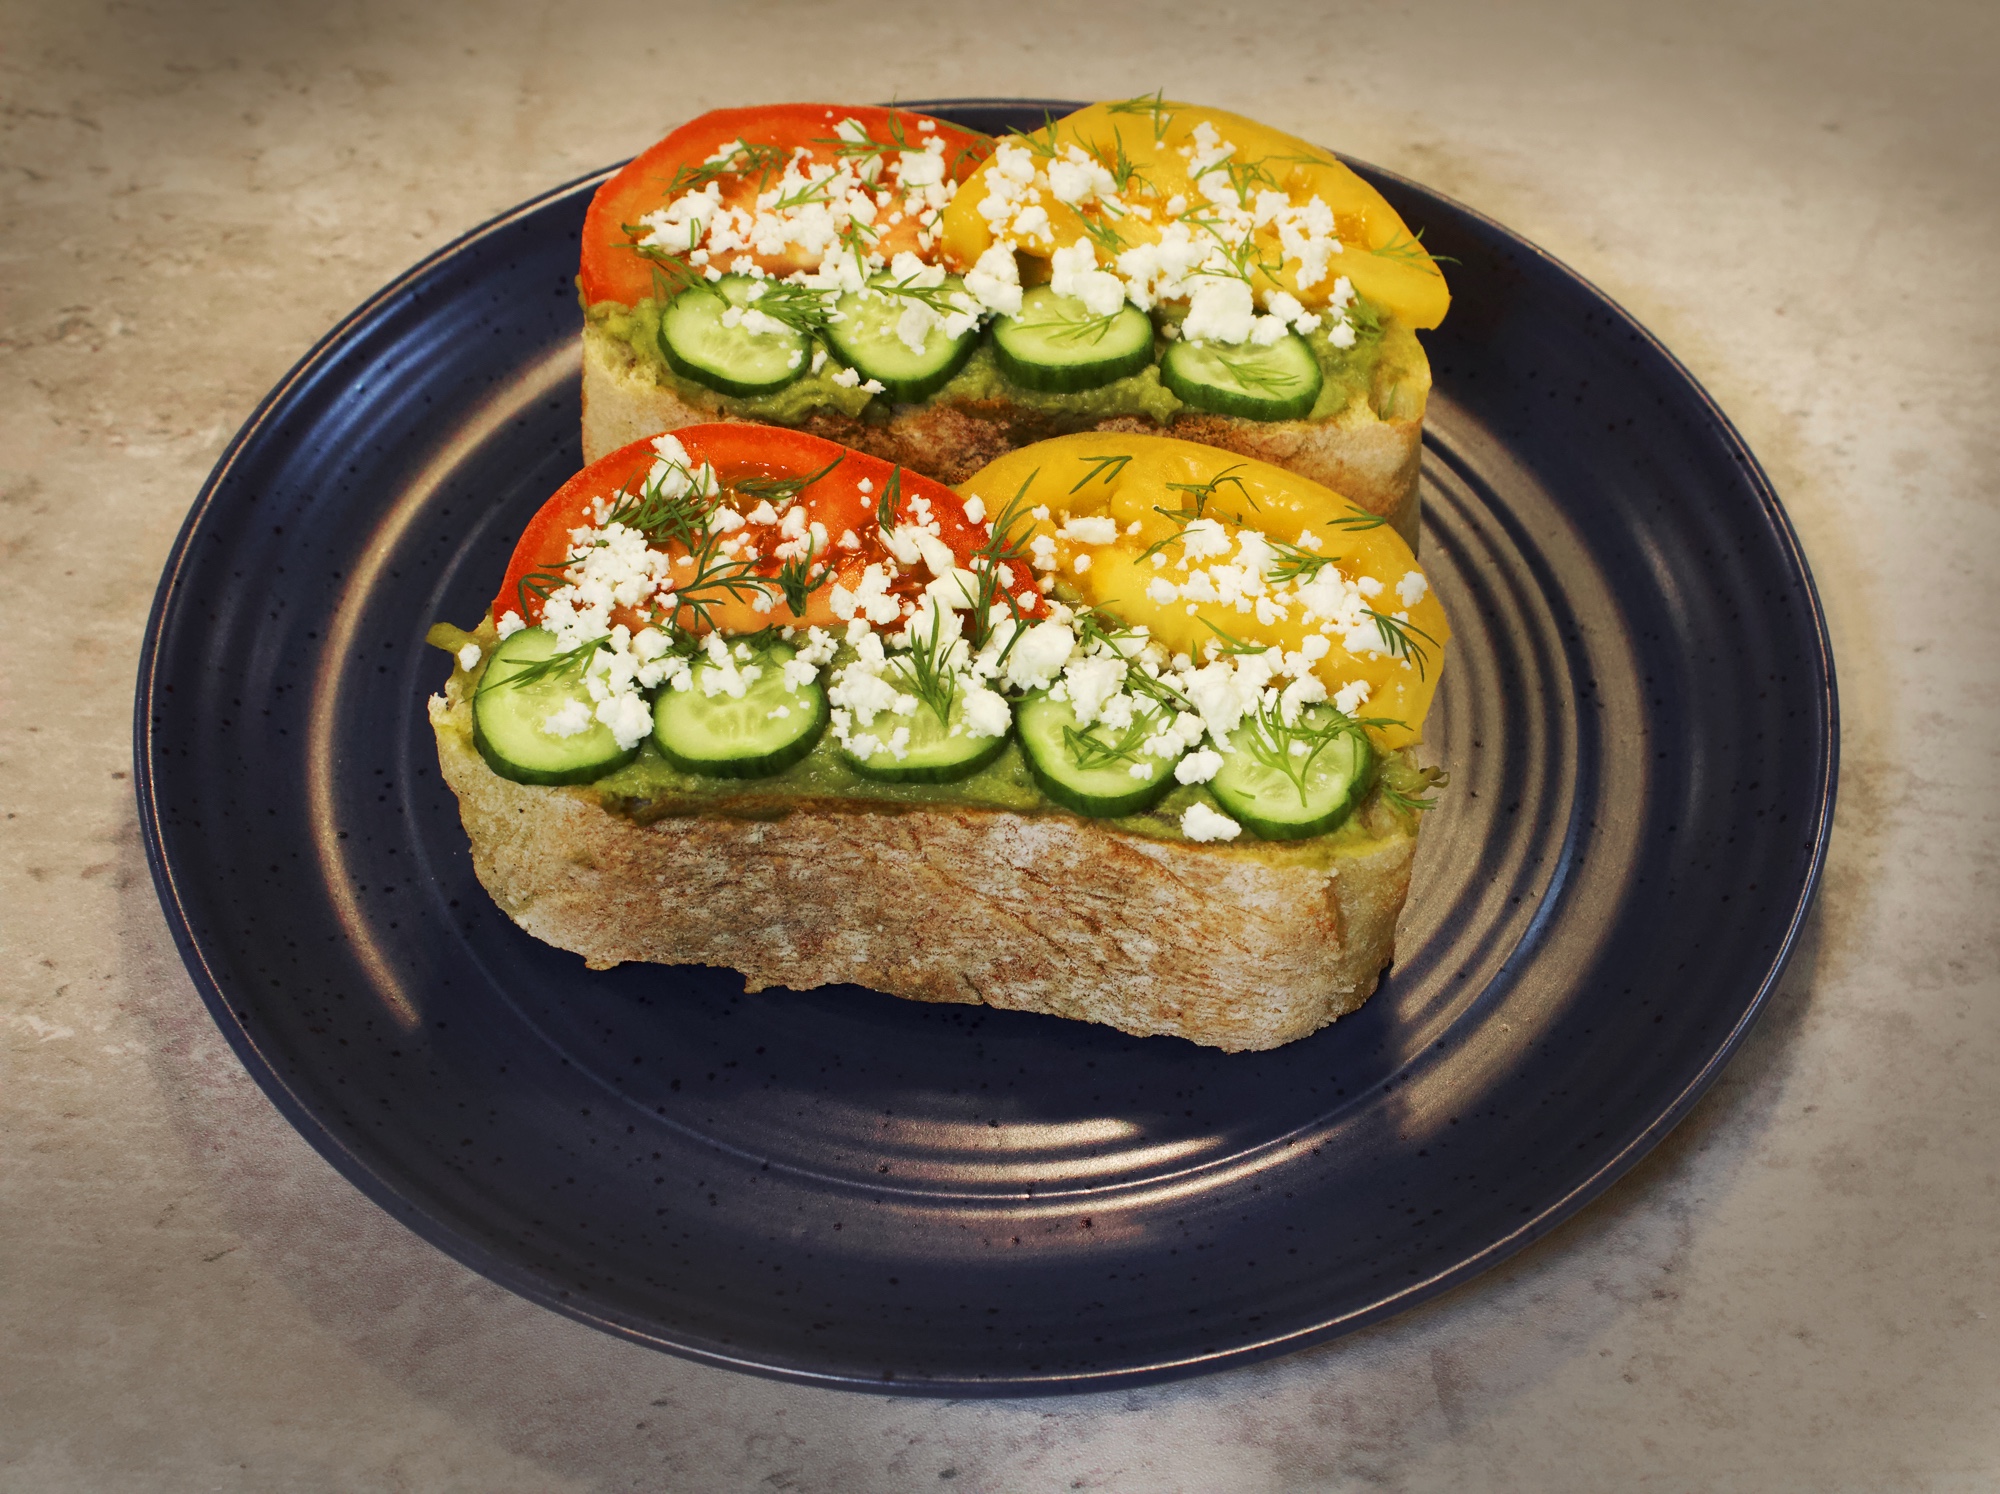 Two slices of sourdough bread with smashed avocado. Sliced tomatoes, cucumbers, feta cheese & dill. 